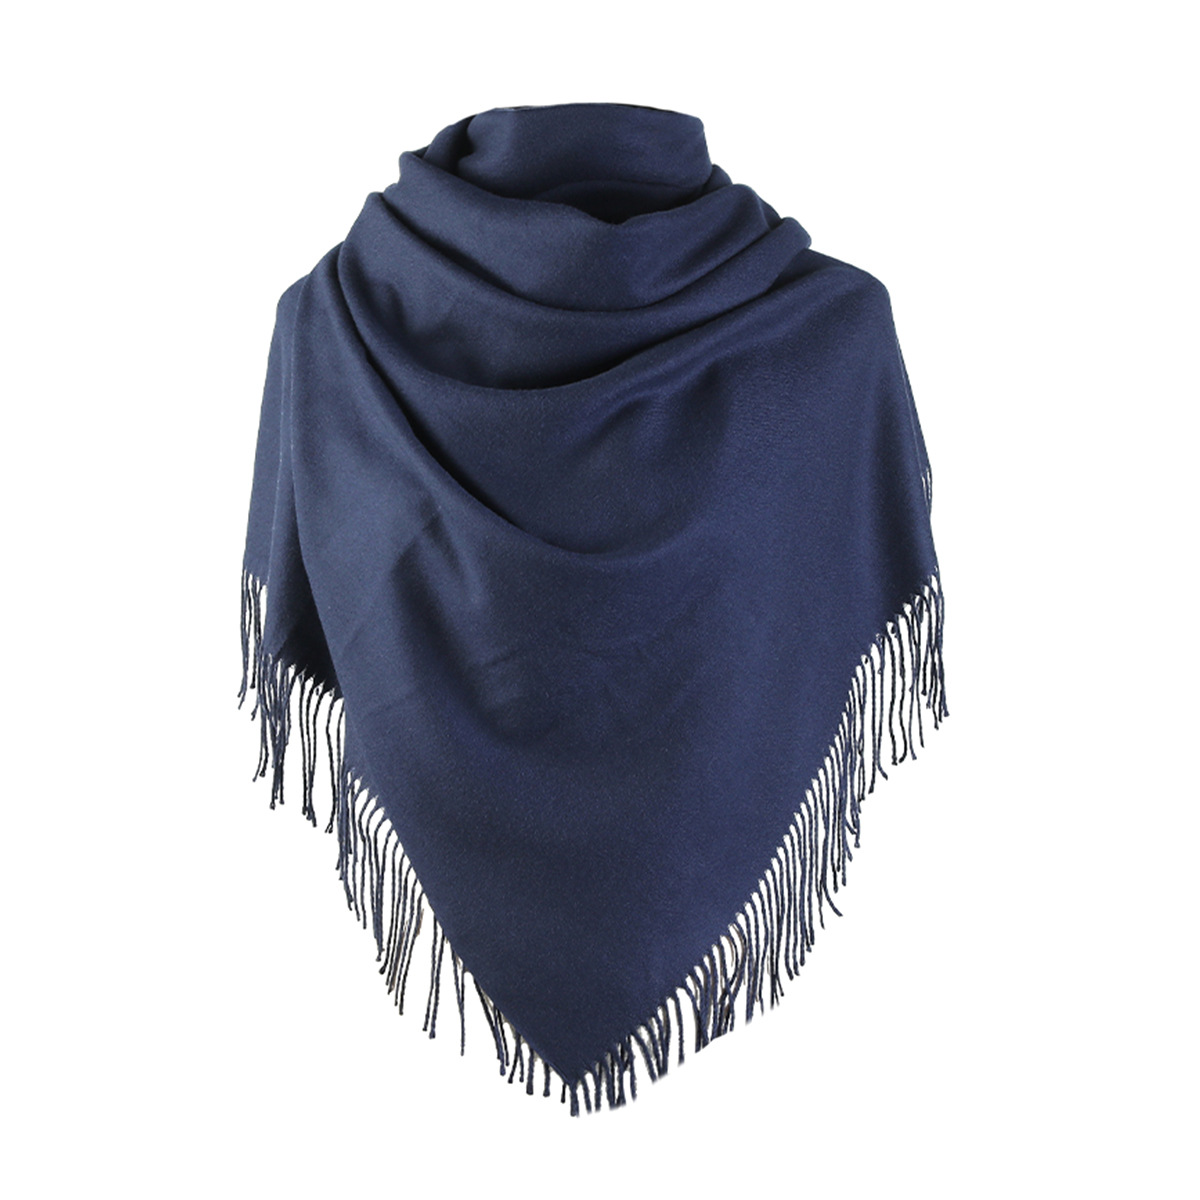 New European and American Fashion All-Match Double-Sided Two-Color Cashmere Scarf Shawl Factory Wholesale Exclusive for Cross-Border